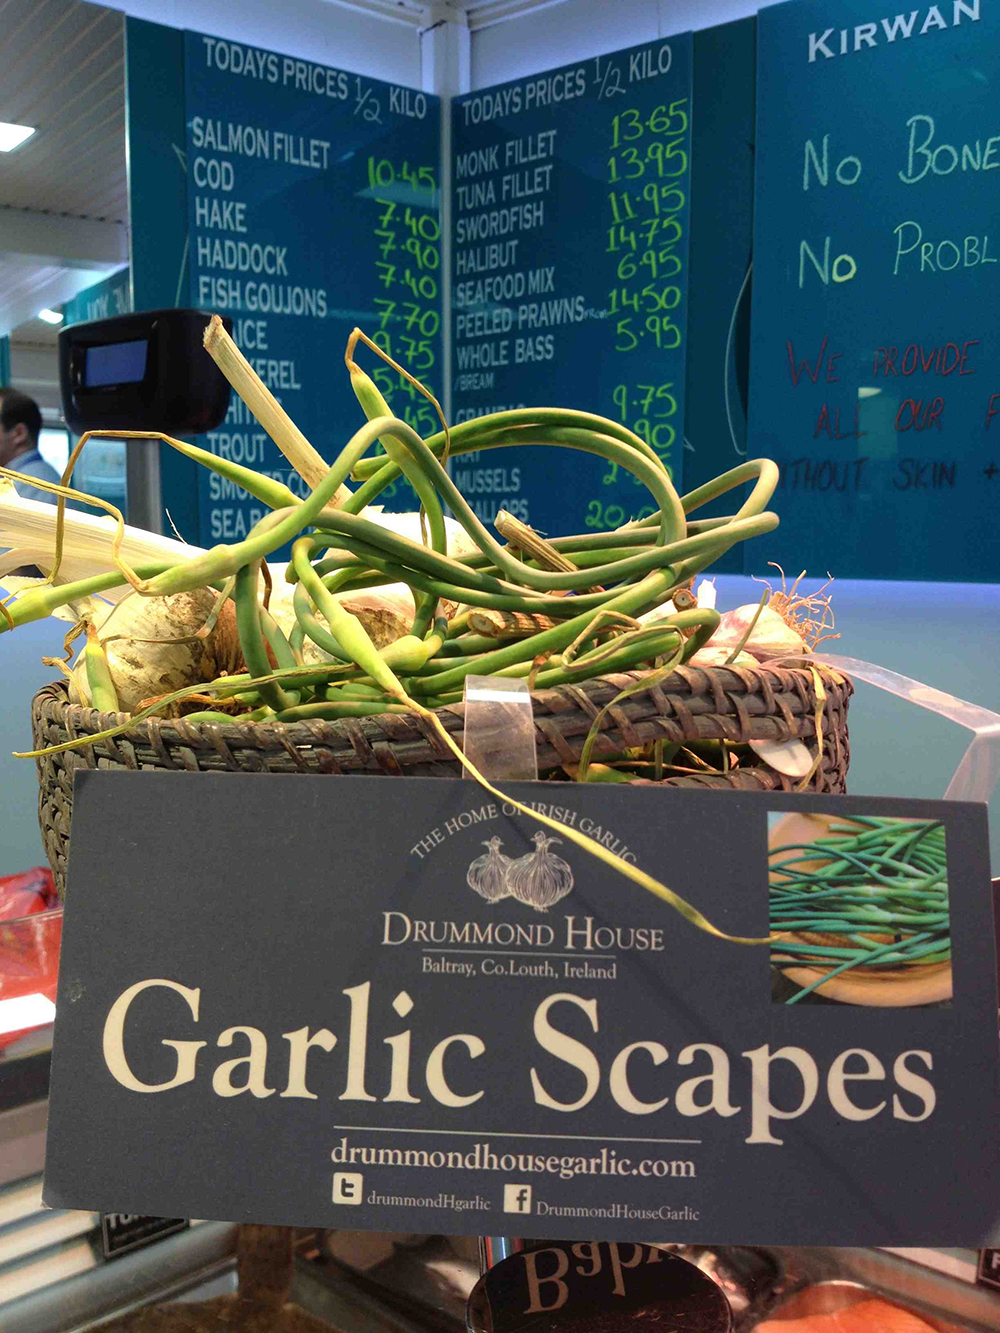 Drummond House Garlic Scapes for sale